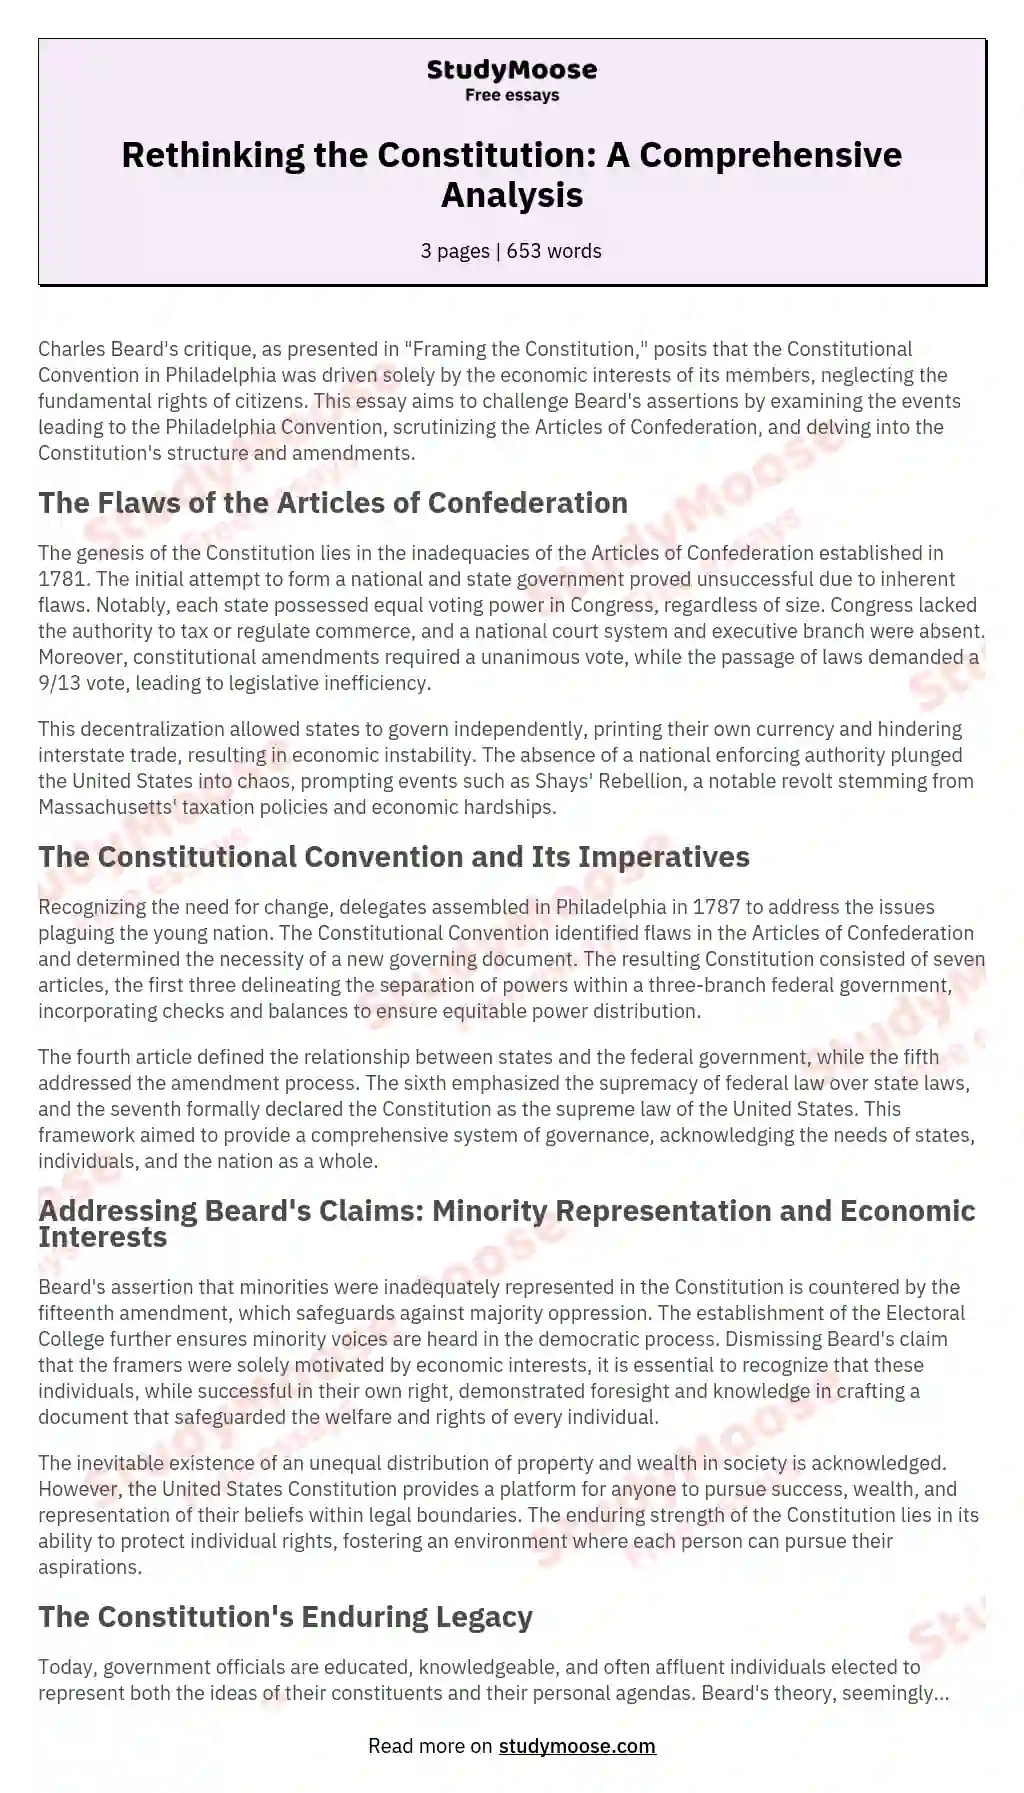 Rethinking the Constitution: A Comprehensive Analysis essay